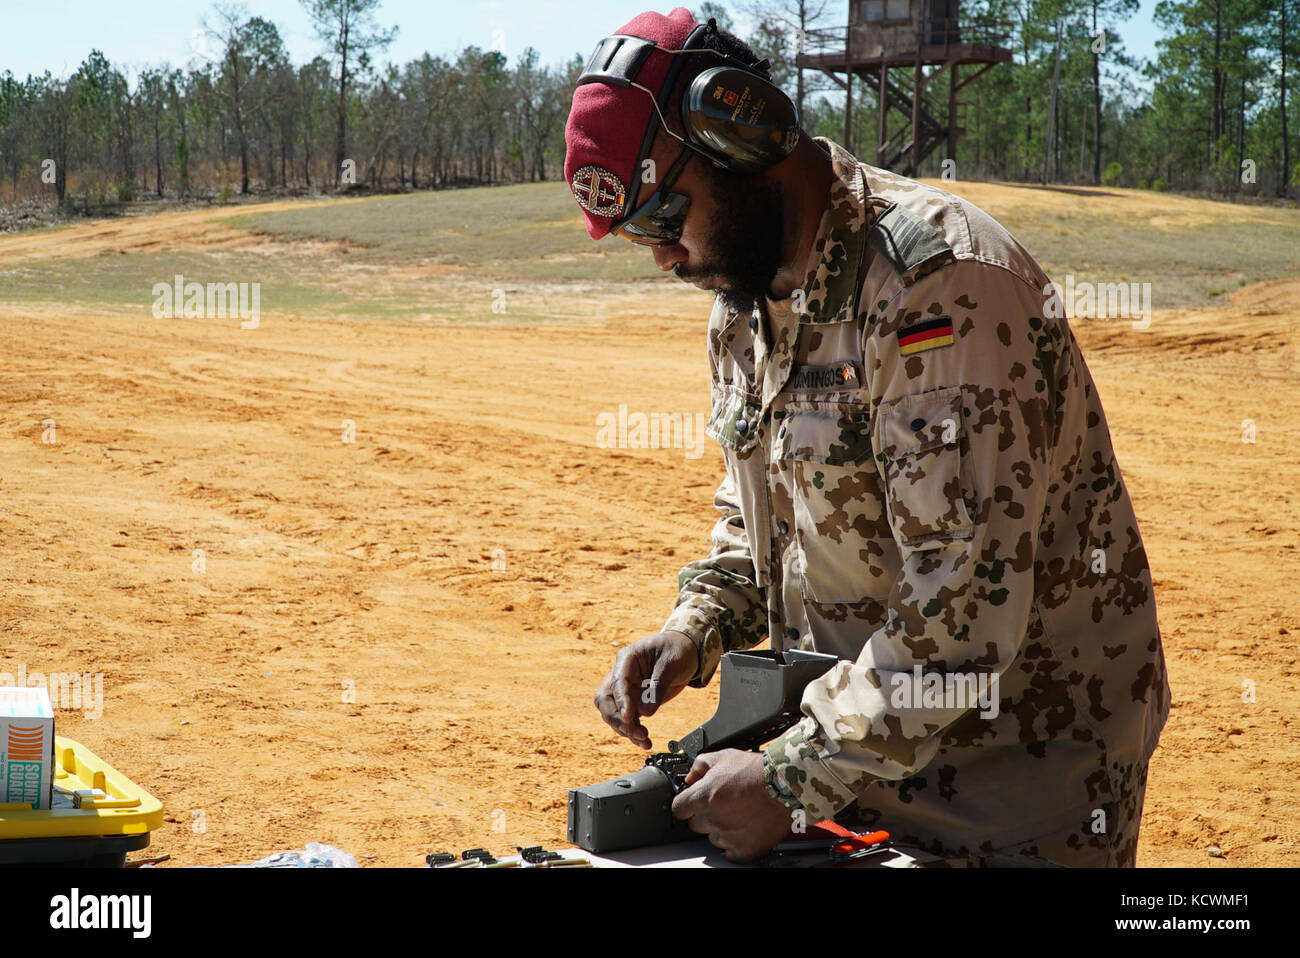 German Armed Forces Spc. Paulo Domingos Manquele loads ammunition for South Carolina National Guard Soldiers and Airmen participating in a live-fire German Proficiency Marksmanship Badge qualification at Fort Jackson, South Carolina with the assistance of Soldiers from the German Armed Forces Command, Mar. 8, 2017. The South Carolina National Guard service members utilized the German MG 3 machine gun, P8 pistol, and G36 assault rifle during the event. (U.S. Army National Guard photo by Capt. Brian Hare) Stock Photo